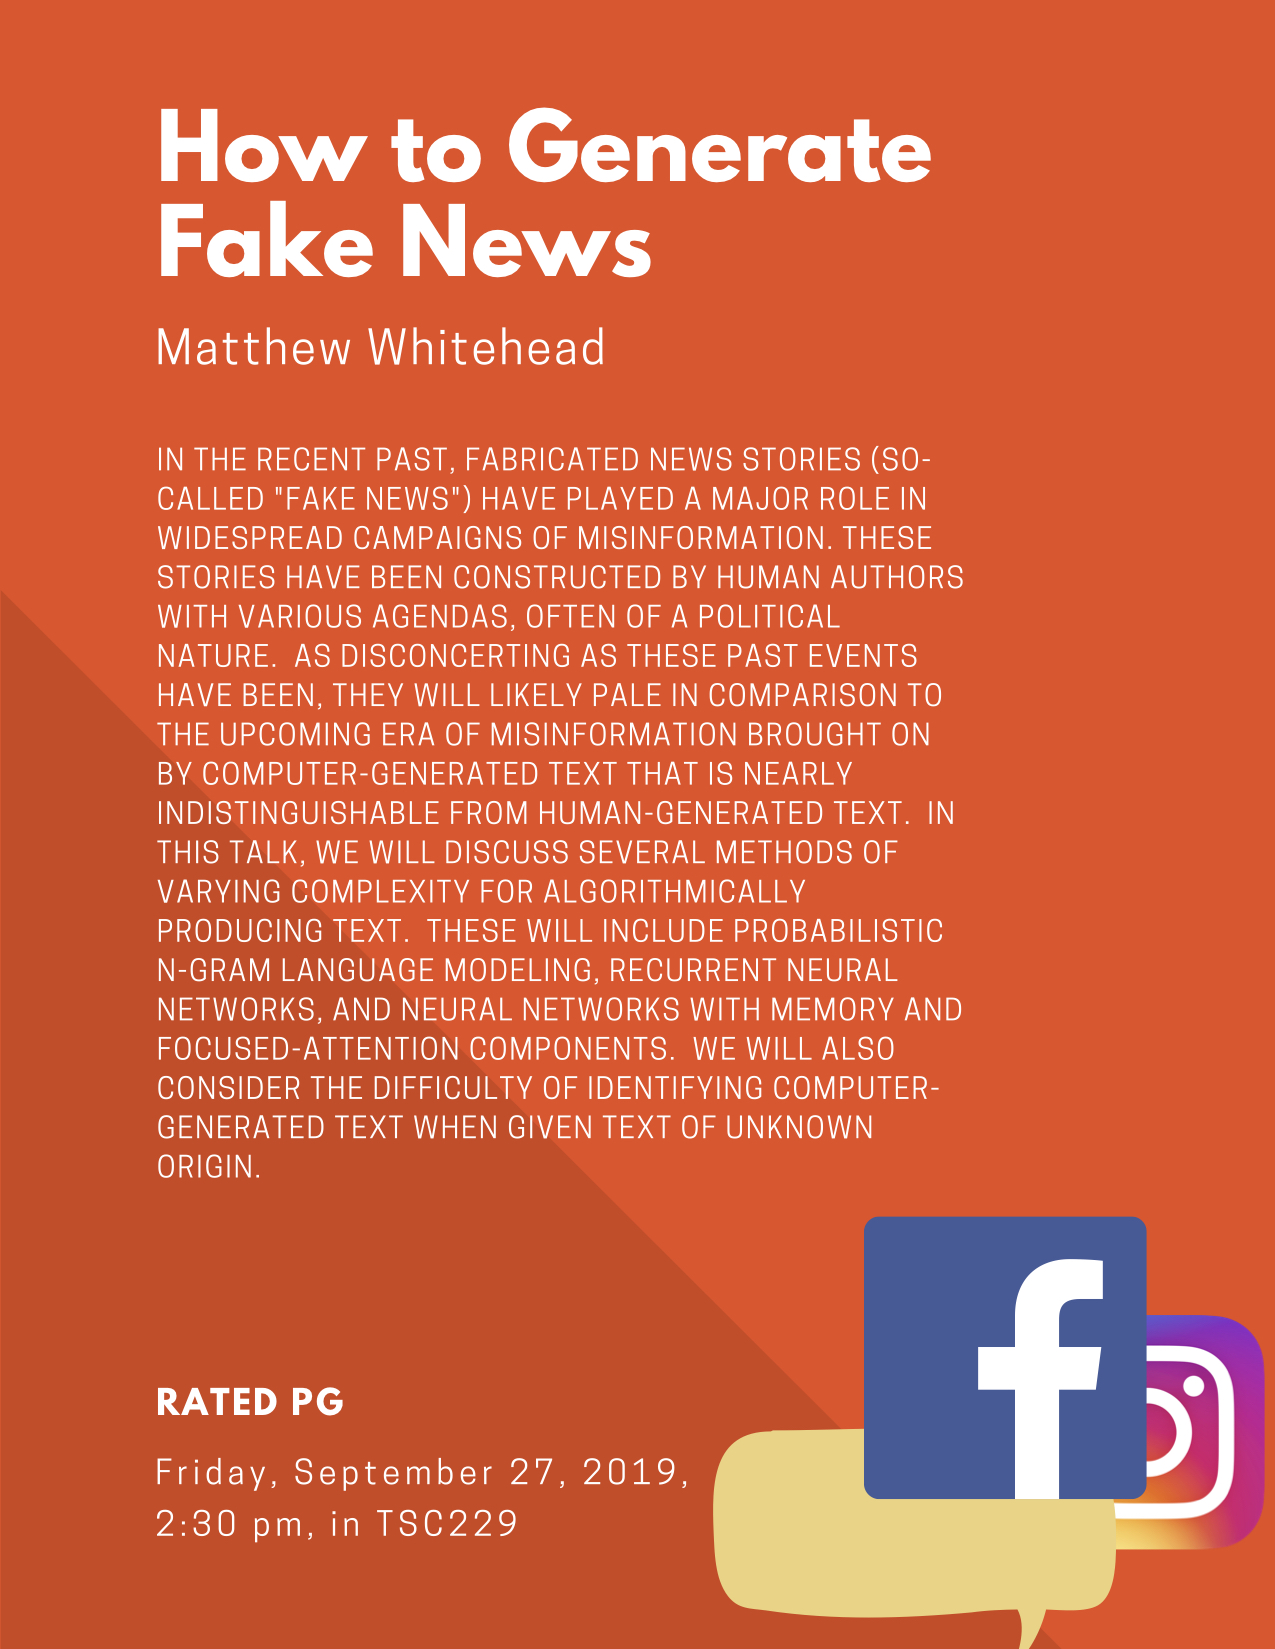 How to Generate Fake News